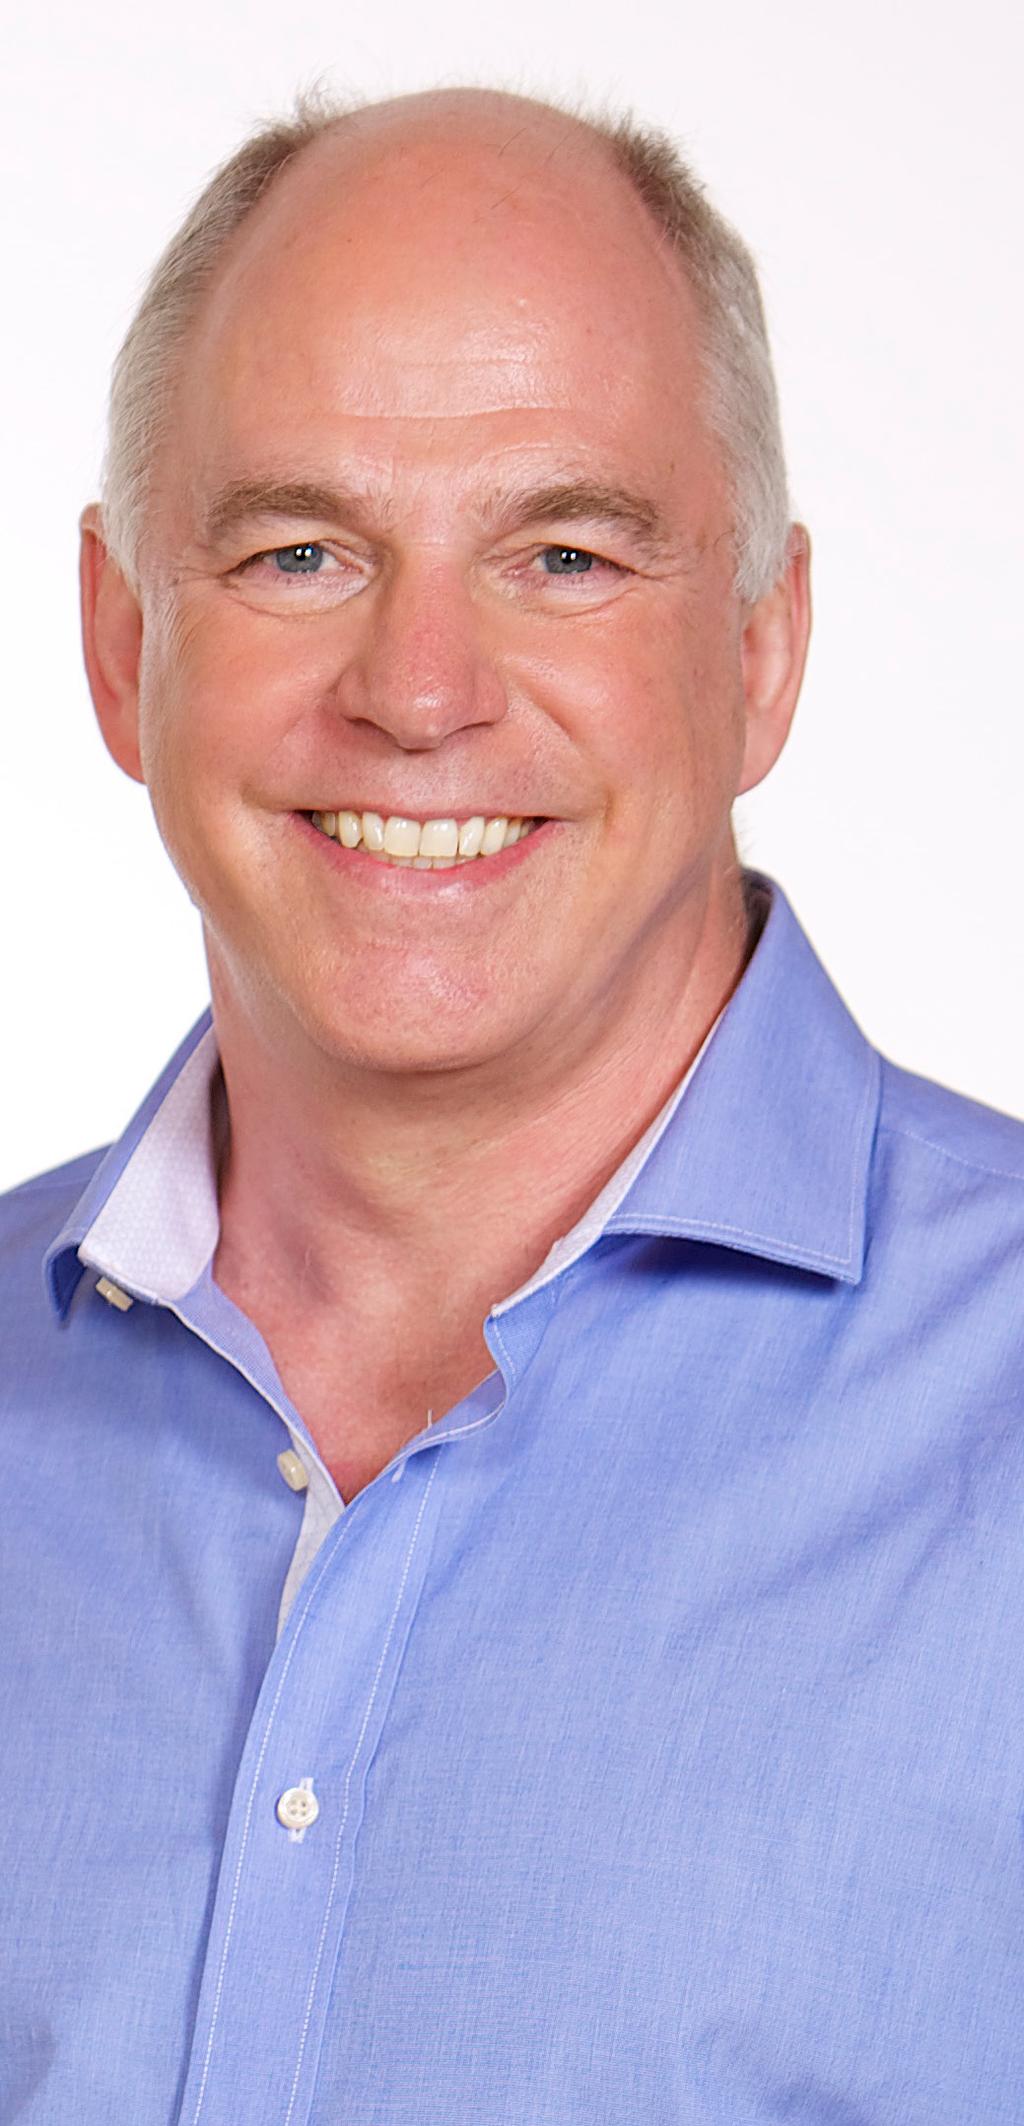 ASK THE EXPERT JONATHAN WOOD, GENERAL & COSMETIC DENTIST - QUALIFIED PRACTICE ASSESSOR BDS - GDC NO 50452 Q: DOES A SMILE Q: HOW PERMANENT IS A Q: DO YOUR TEETH GET MAKEOVER GIVE YOU A SMILE MAKEOVER?